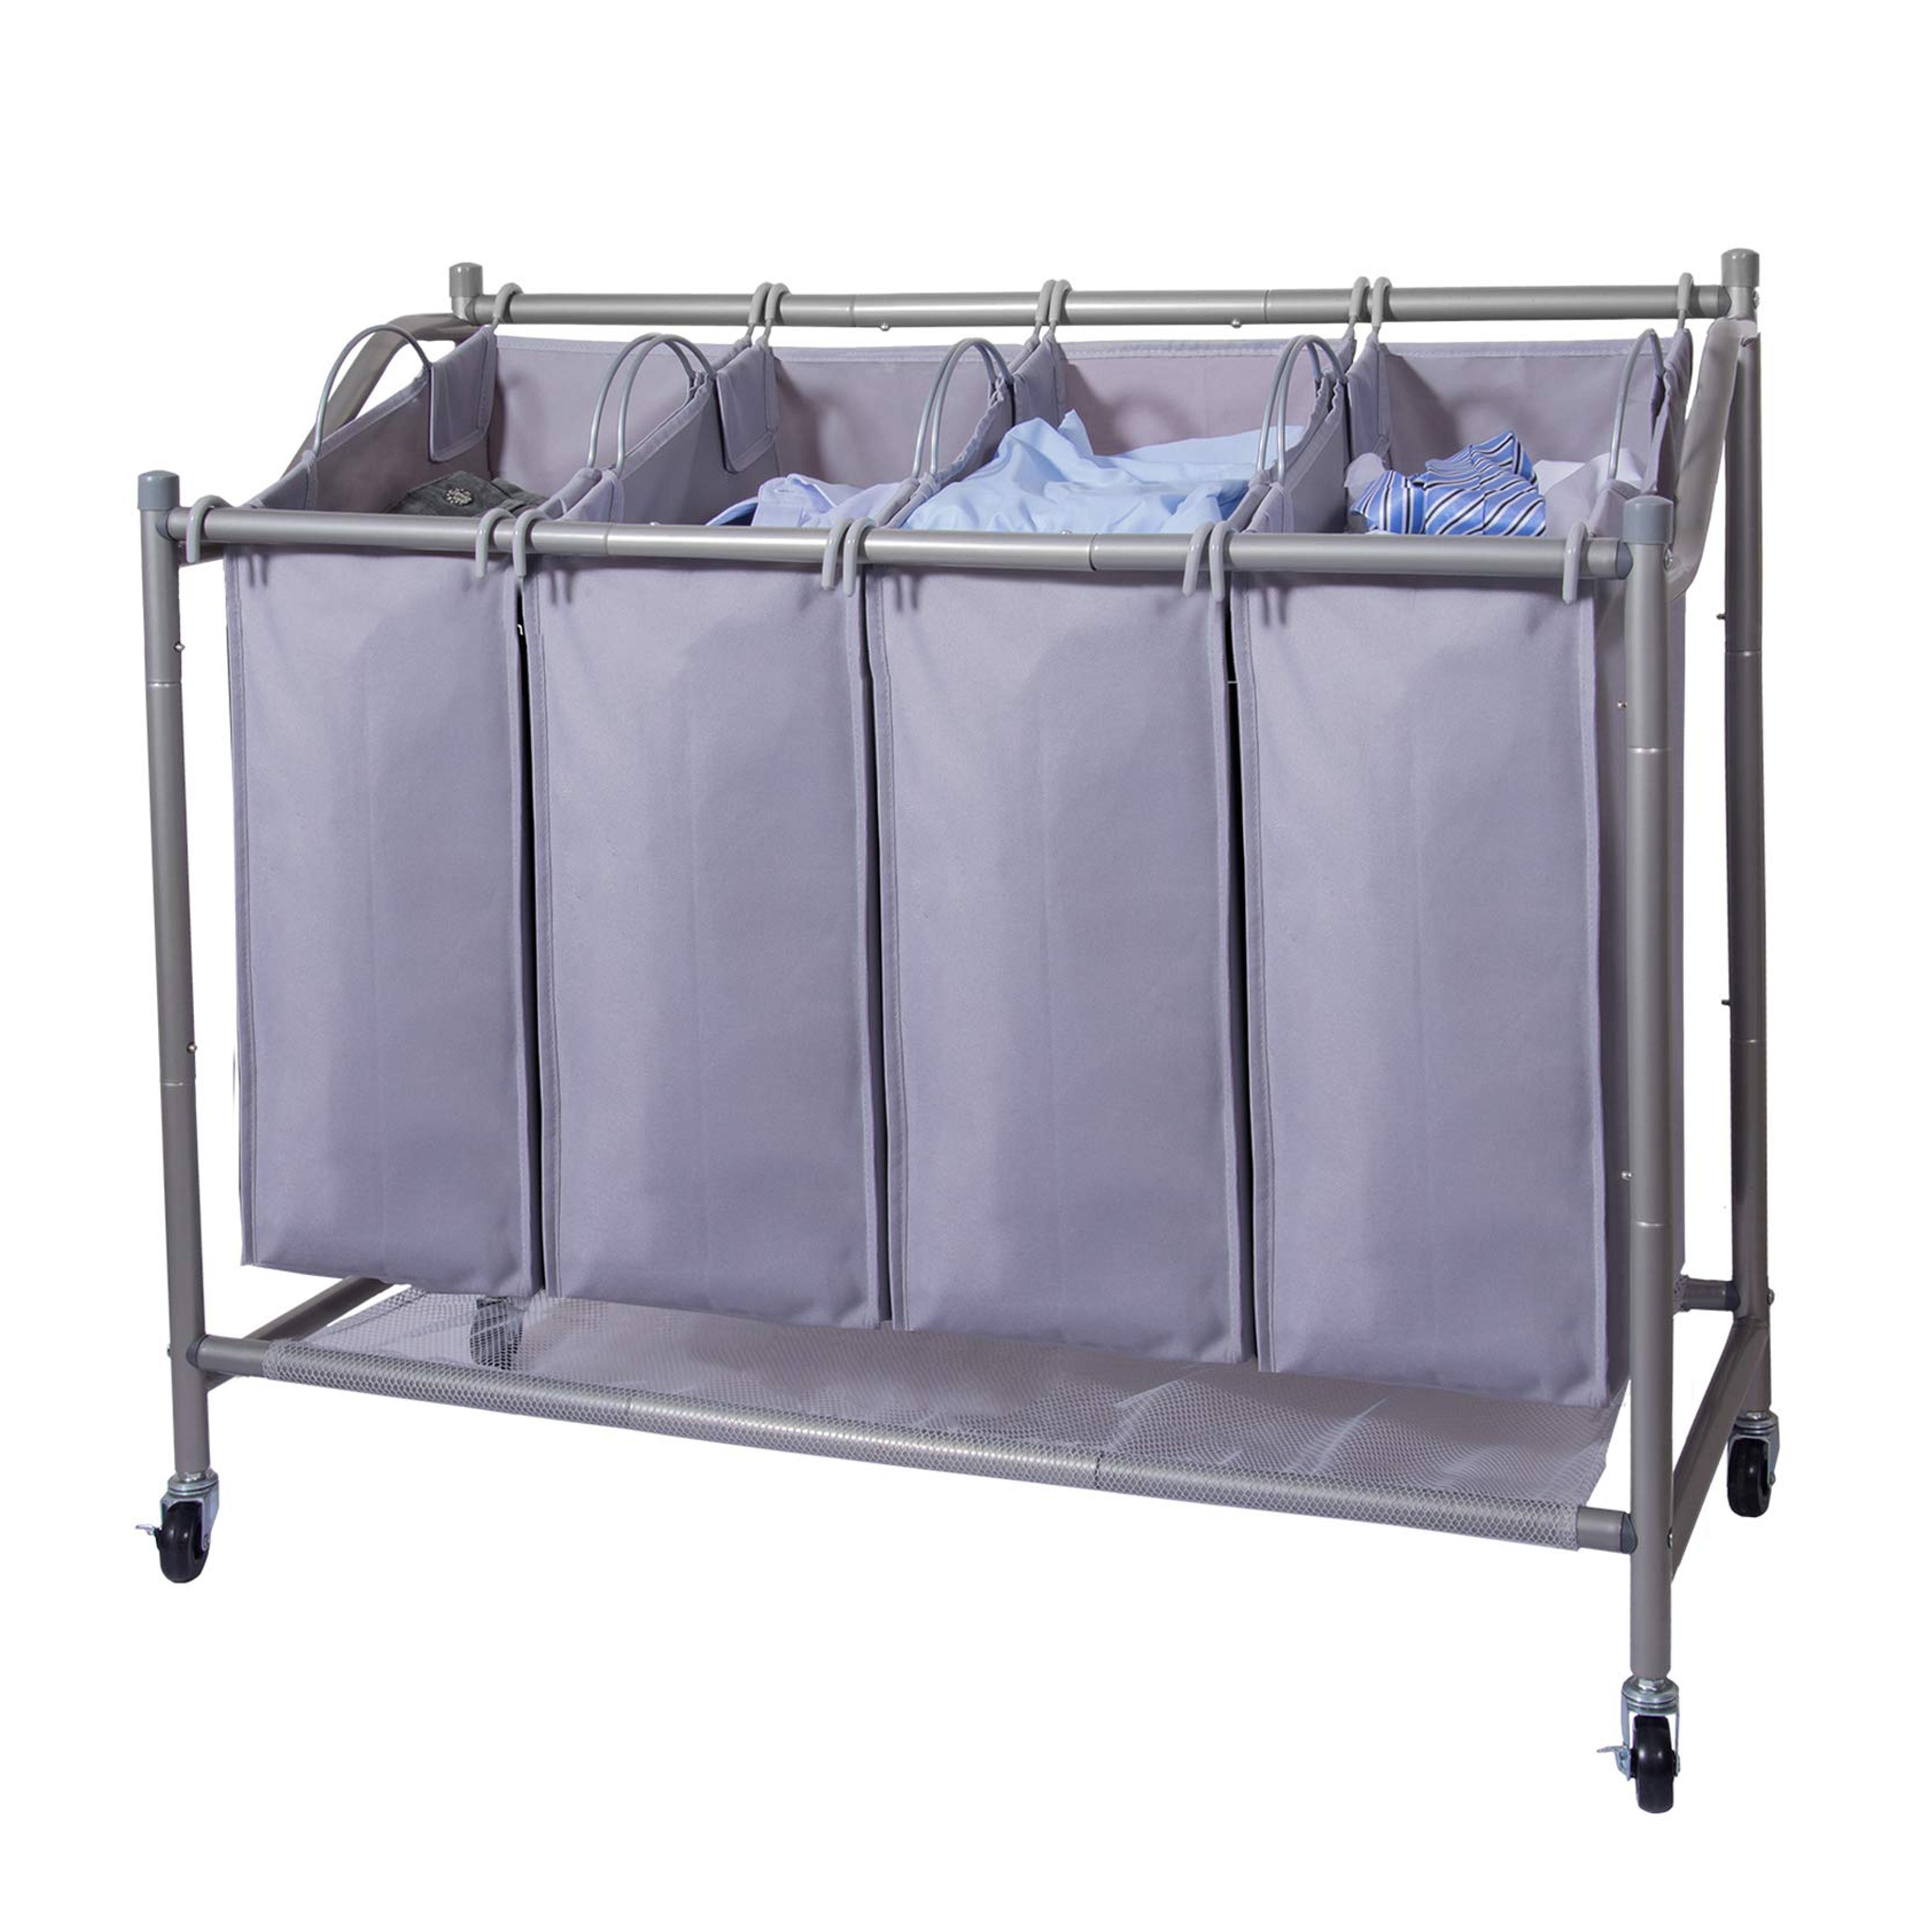 Laundry Sorter Cart 4-Bag Classics Rolling Laundry Hamper, Sturdy Frame with 60KG Weight Capacity, Gray